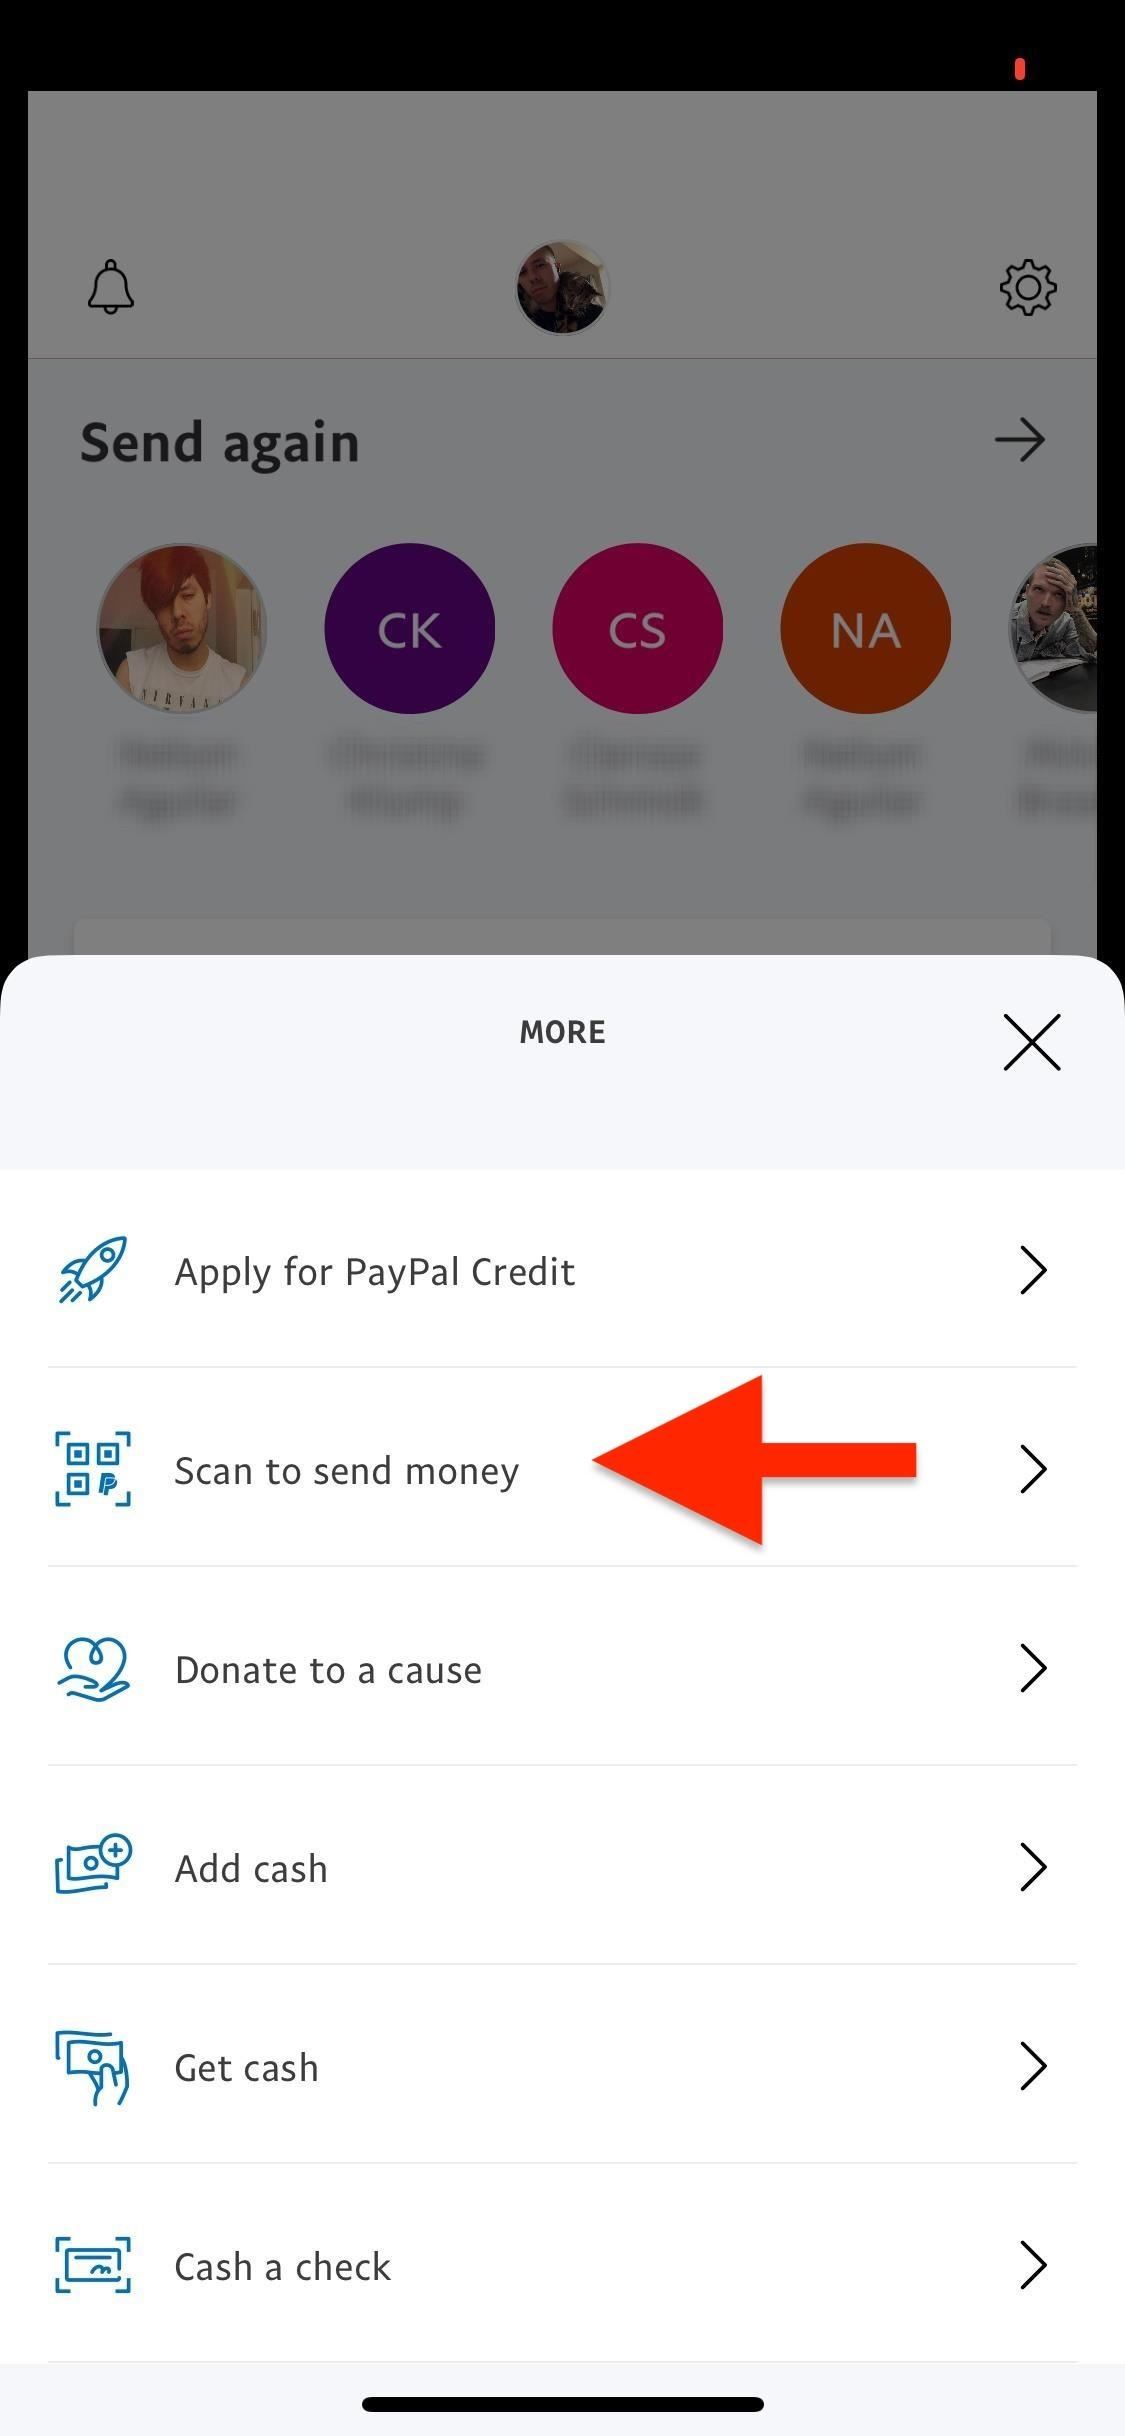 How to Share & Scan PayPal QR Codes for Faster Transactions When Receiving or Sending Money